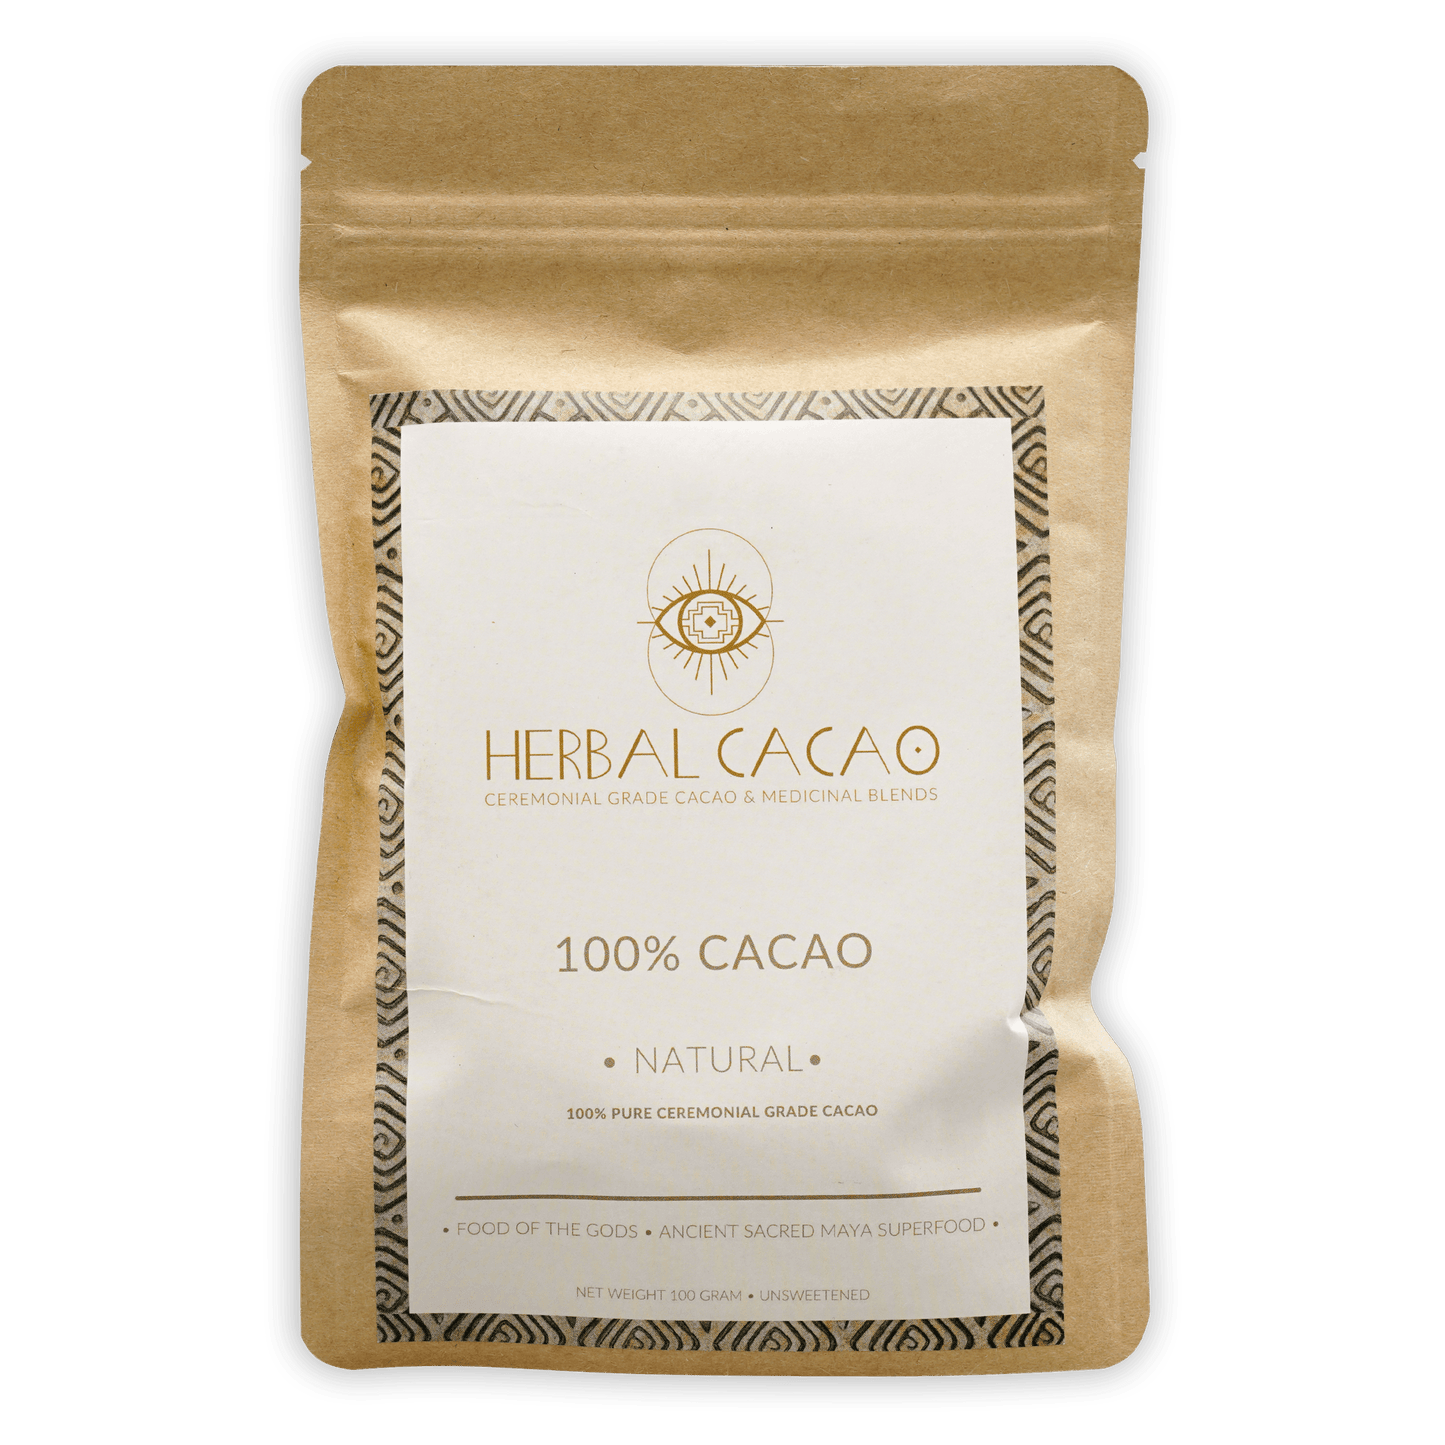 Herbal Cacao Ceremonial Cacao Natural 100%